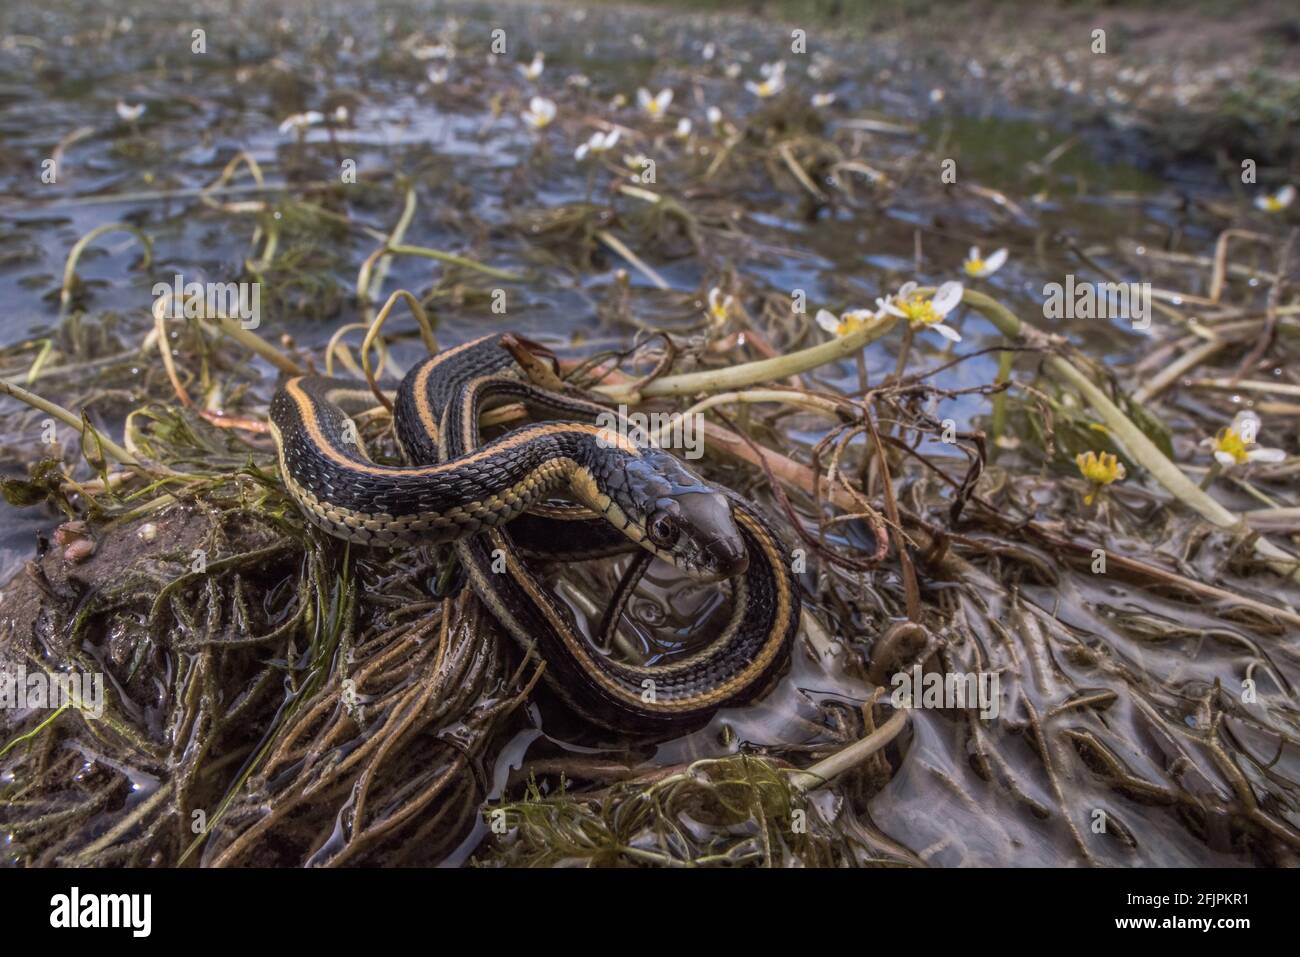 A baby aquatic gartersnake (Thamnophis atratus zaxanthus) next to a pond in California. Stock Photo